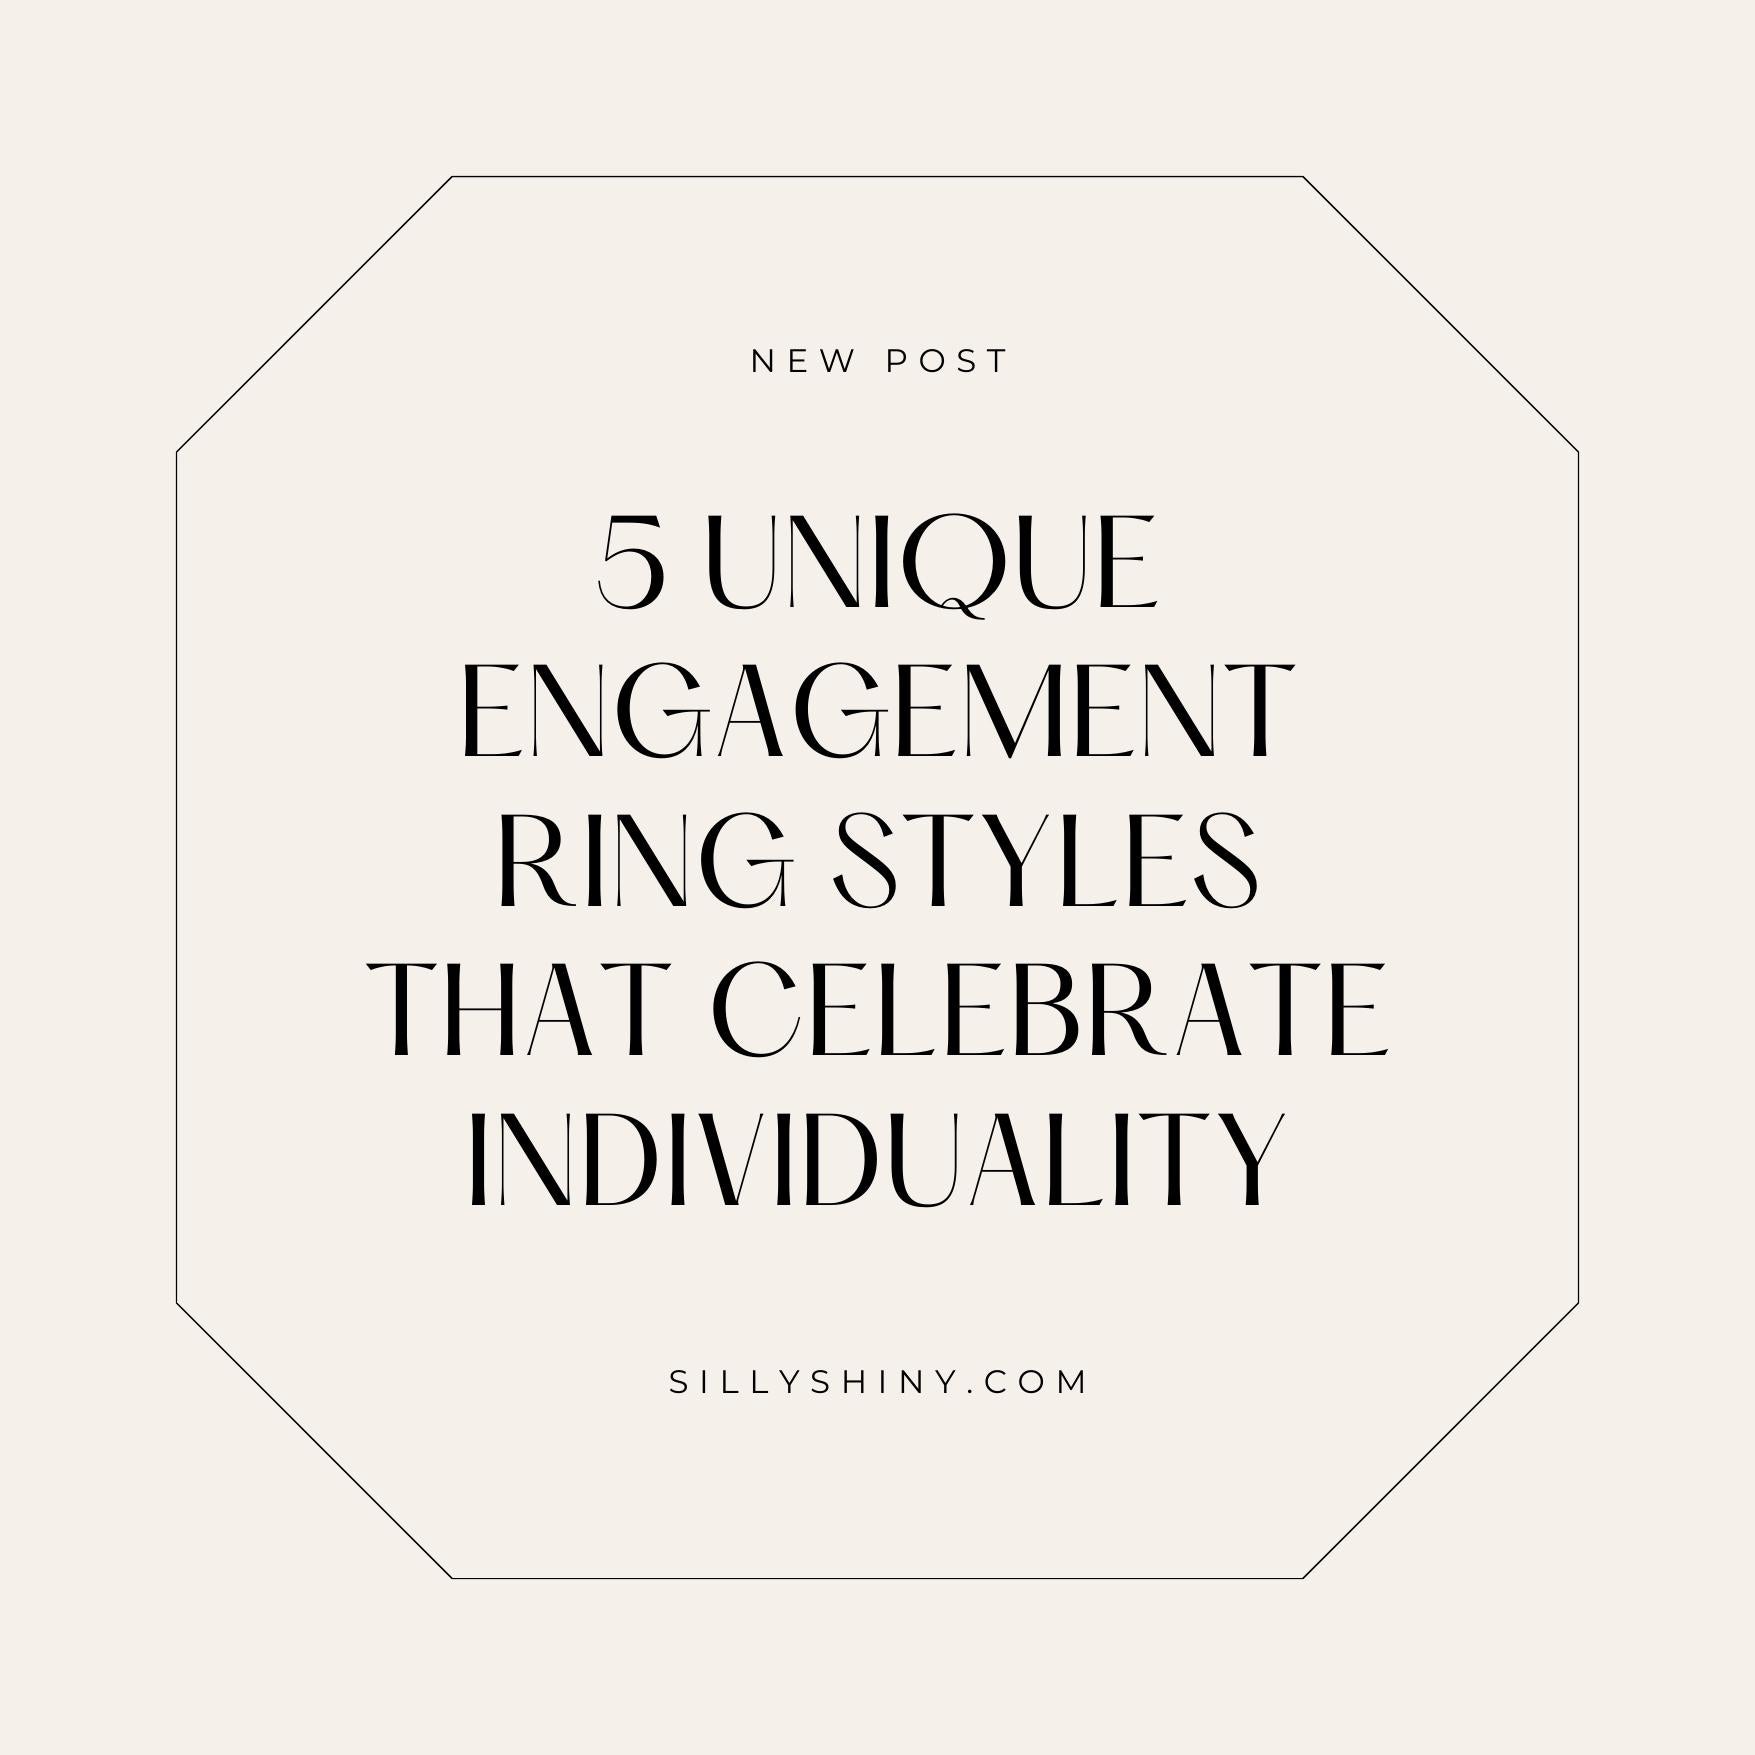 5 Unique Engagement Ring Styles that Celebrate Individuality